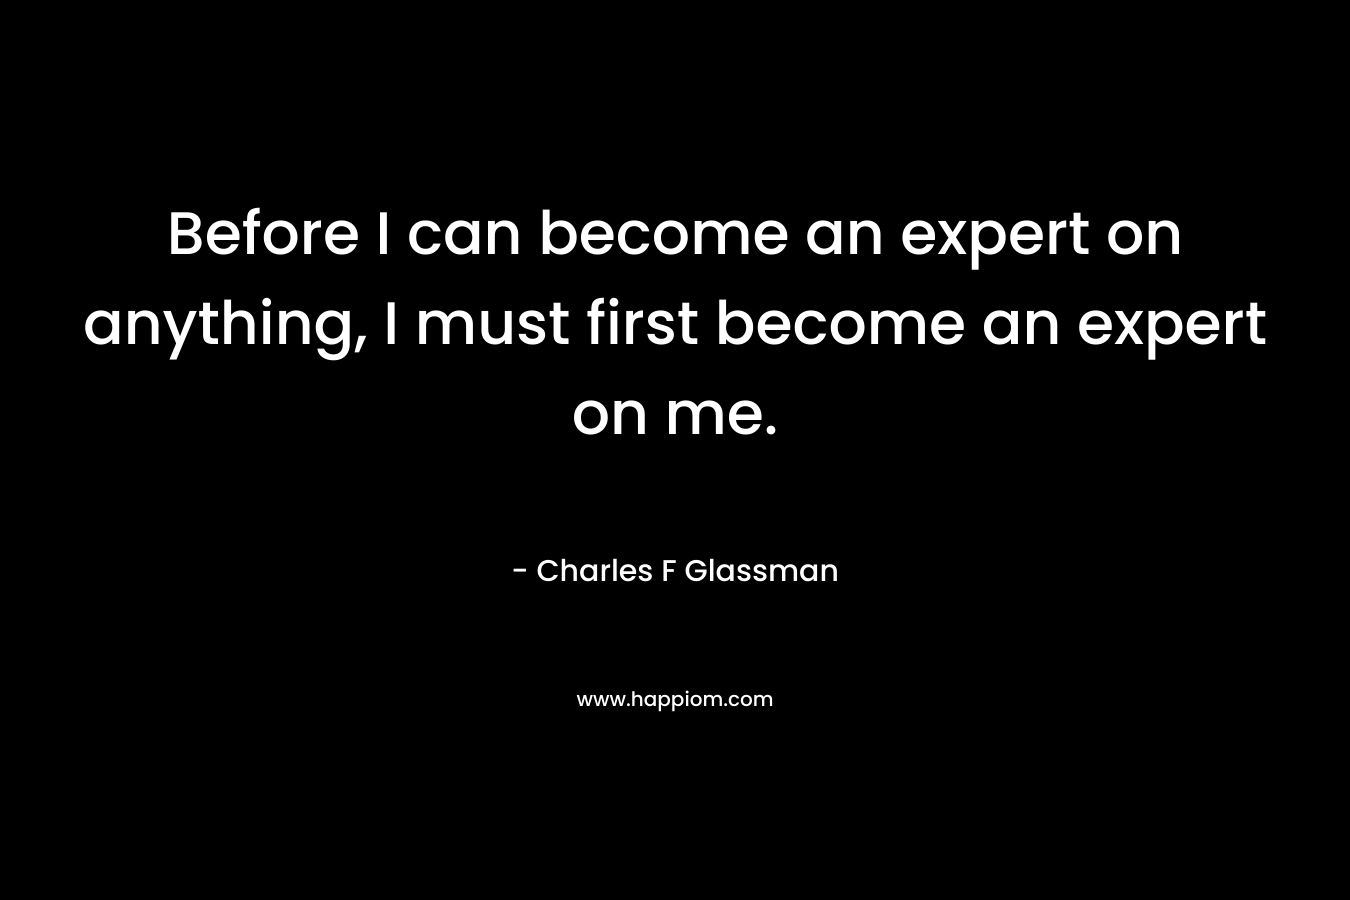 Before I can become an expert on anything, I must first become an expert on me.